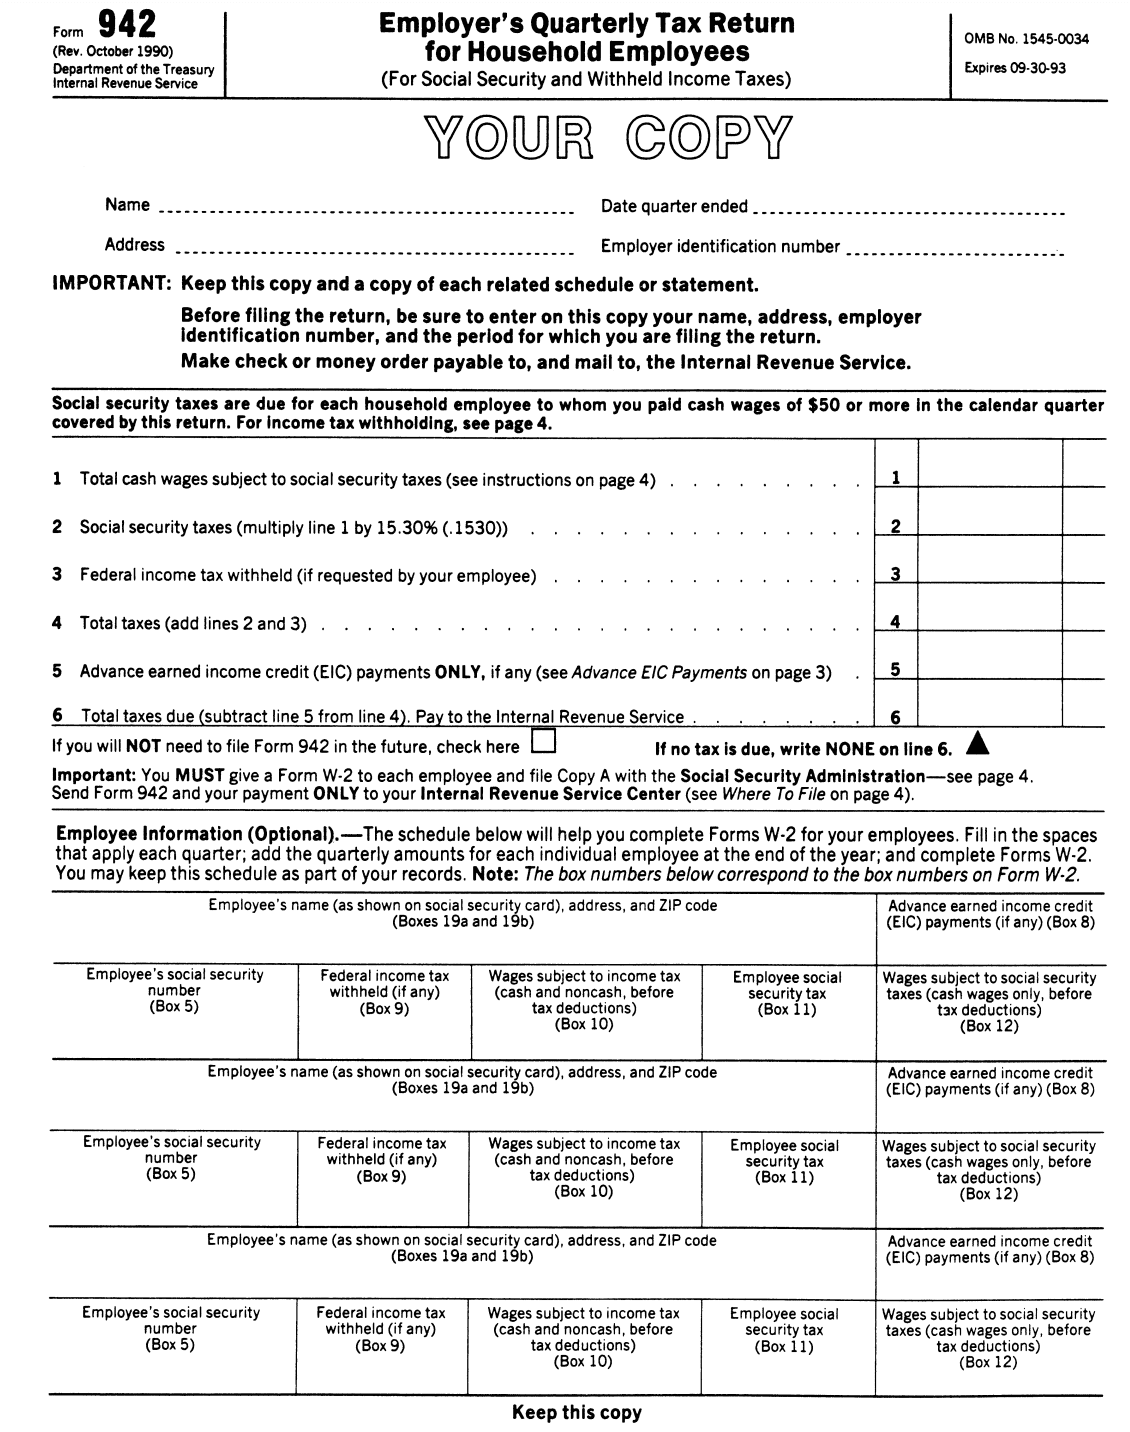 filing-form-942-guide-for-household-employers.png